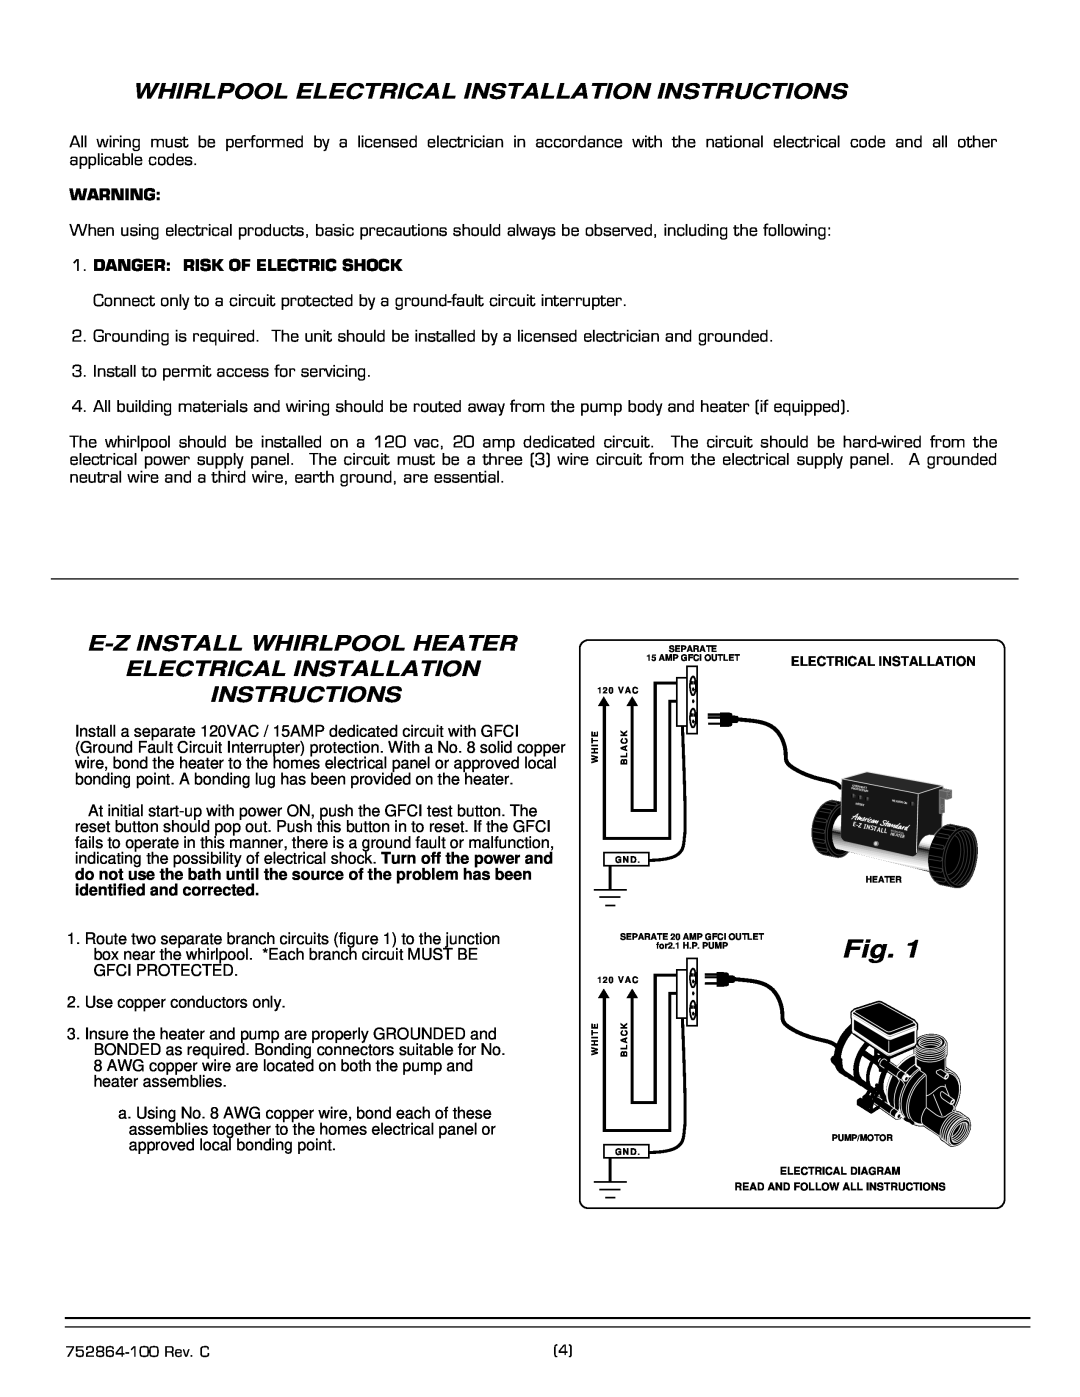 American Standard 6060E SERIES Whirlpool Electrical Installation Instructions, Danger Risk Of Electric Shock 